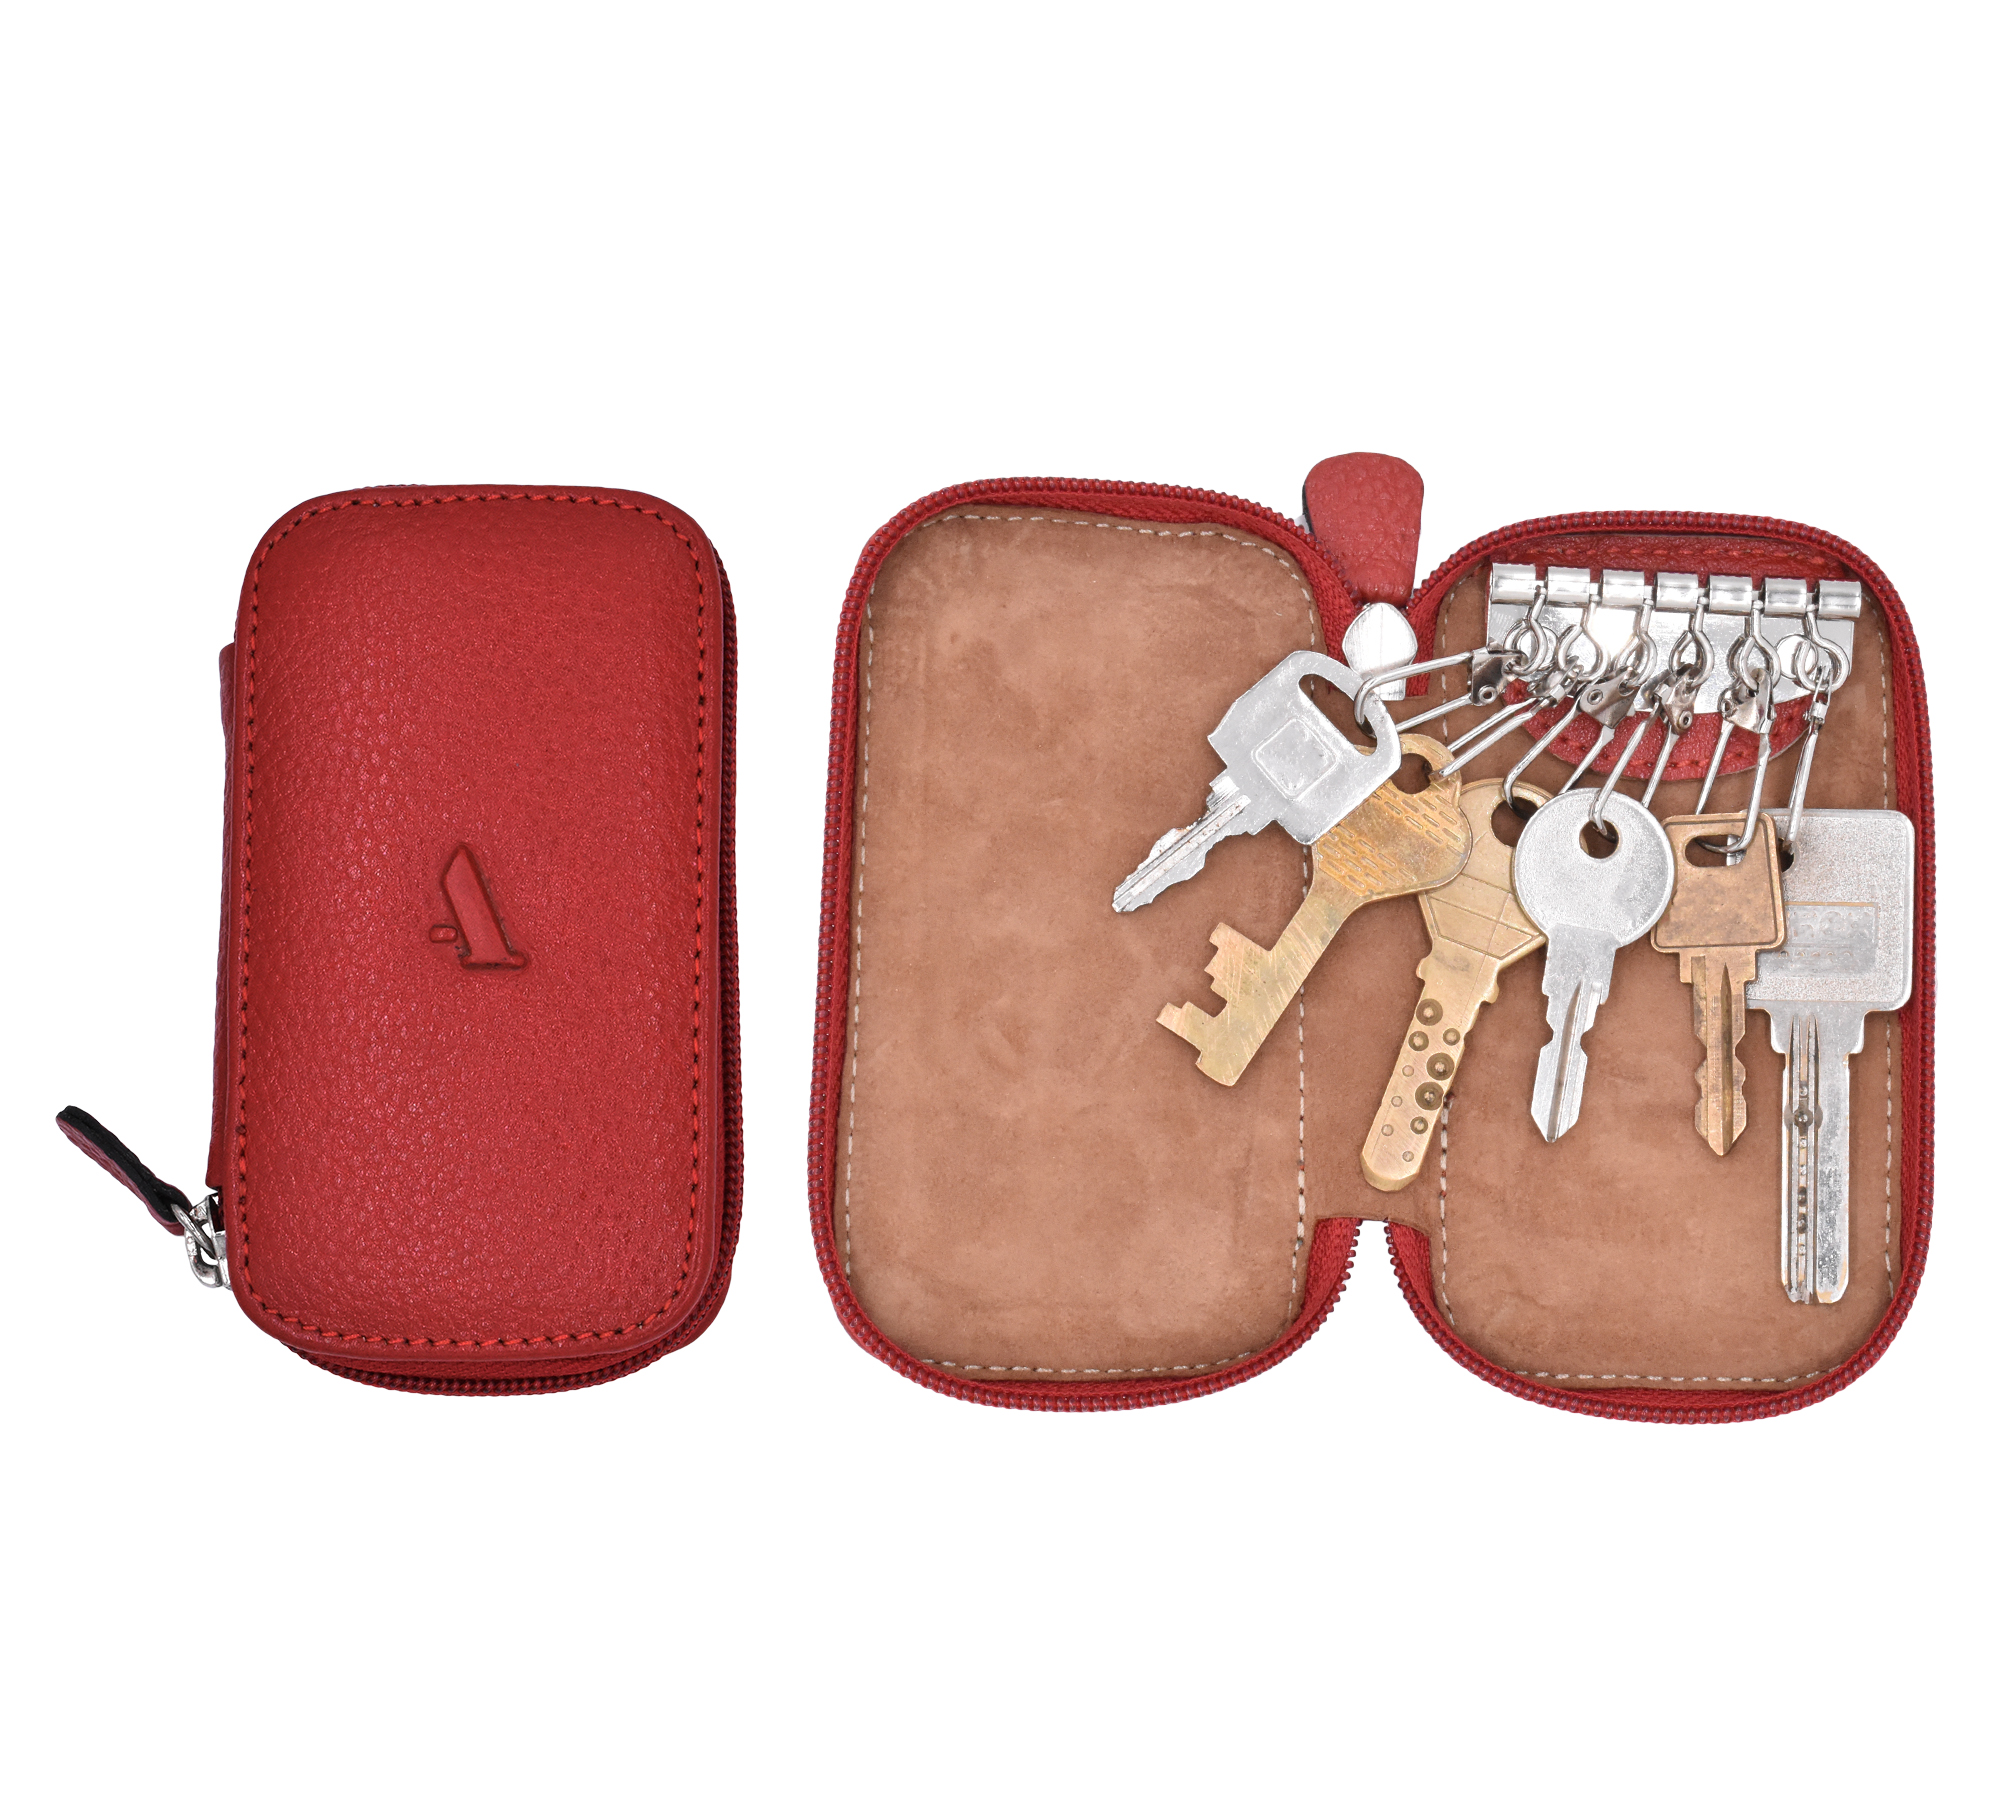  Leather Key Chain(Red)W55